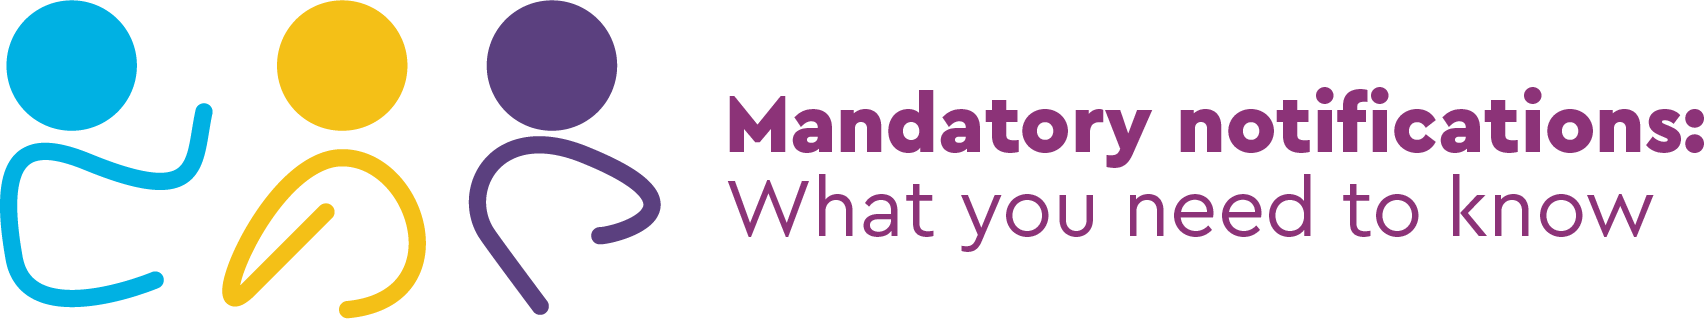 What mandatory notification means for you